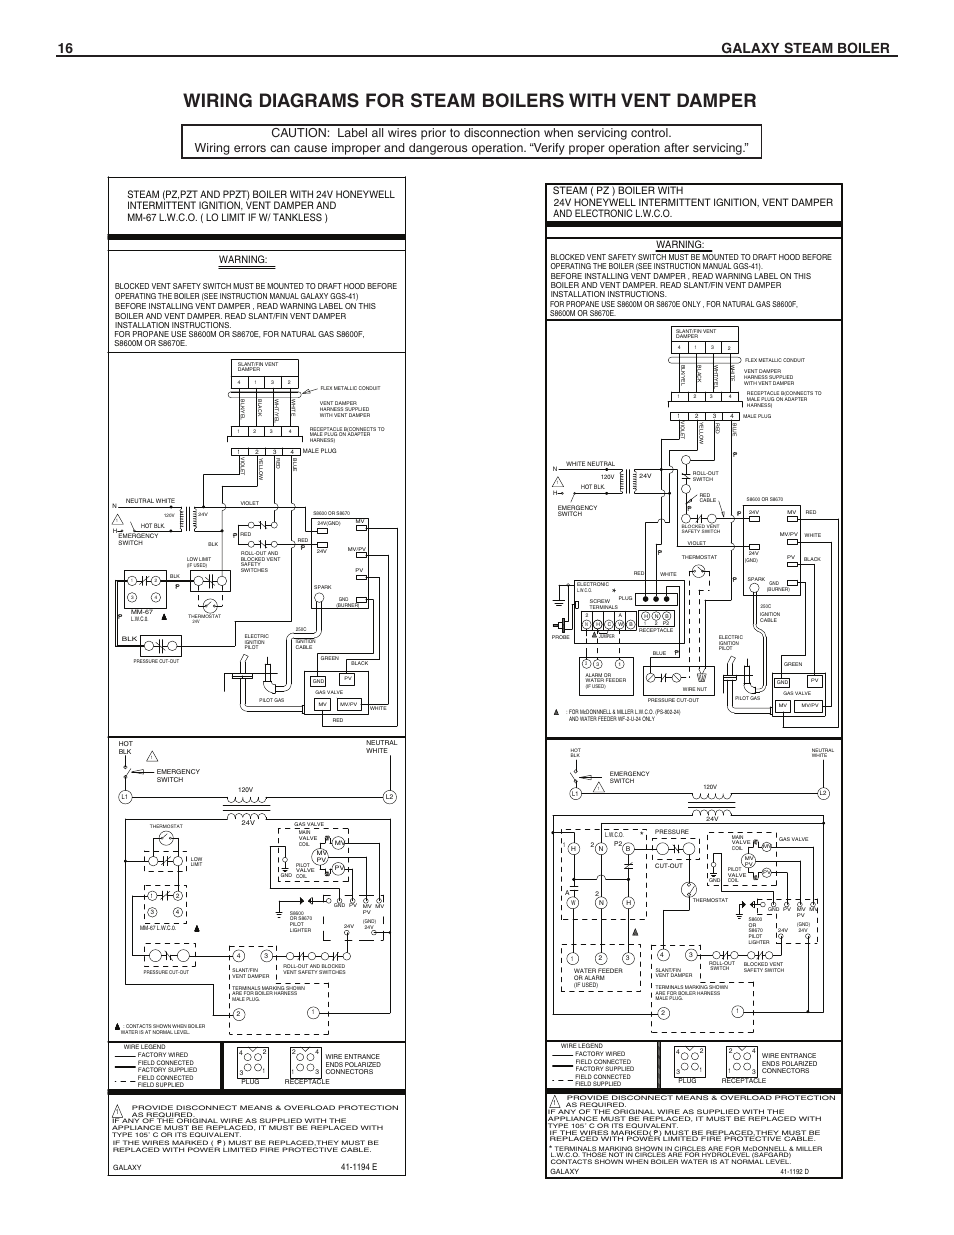 Wiring diagrams for steam boilers with vent damper, 16 galaxy steam boiler, Warning | Slant/Fin GXHA-200 User Manual | Page 16 / 20